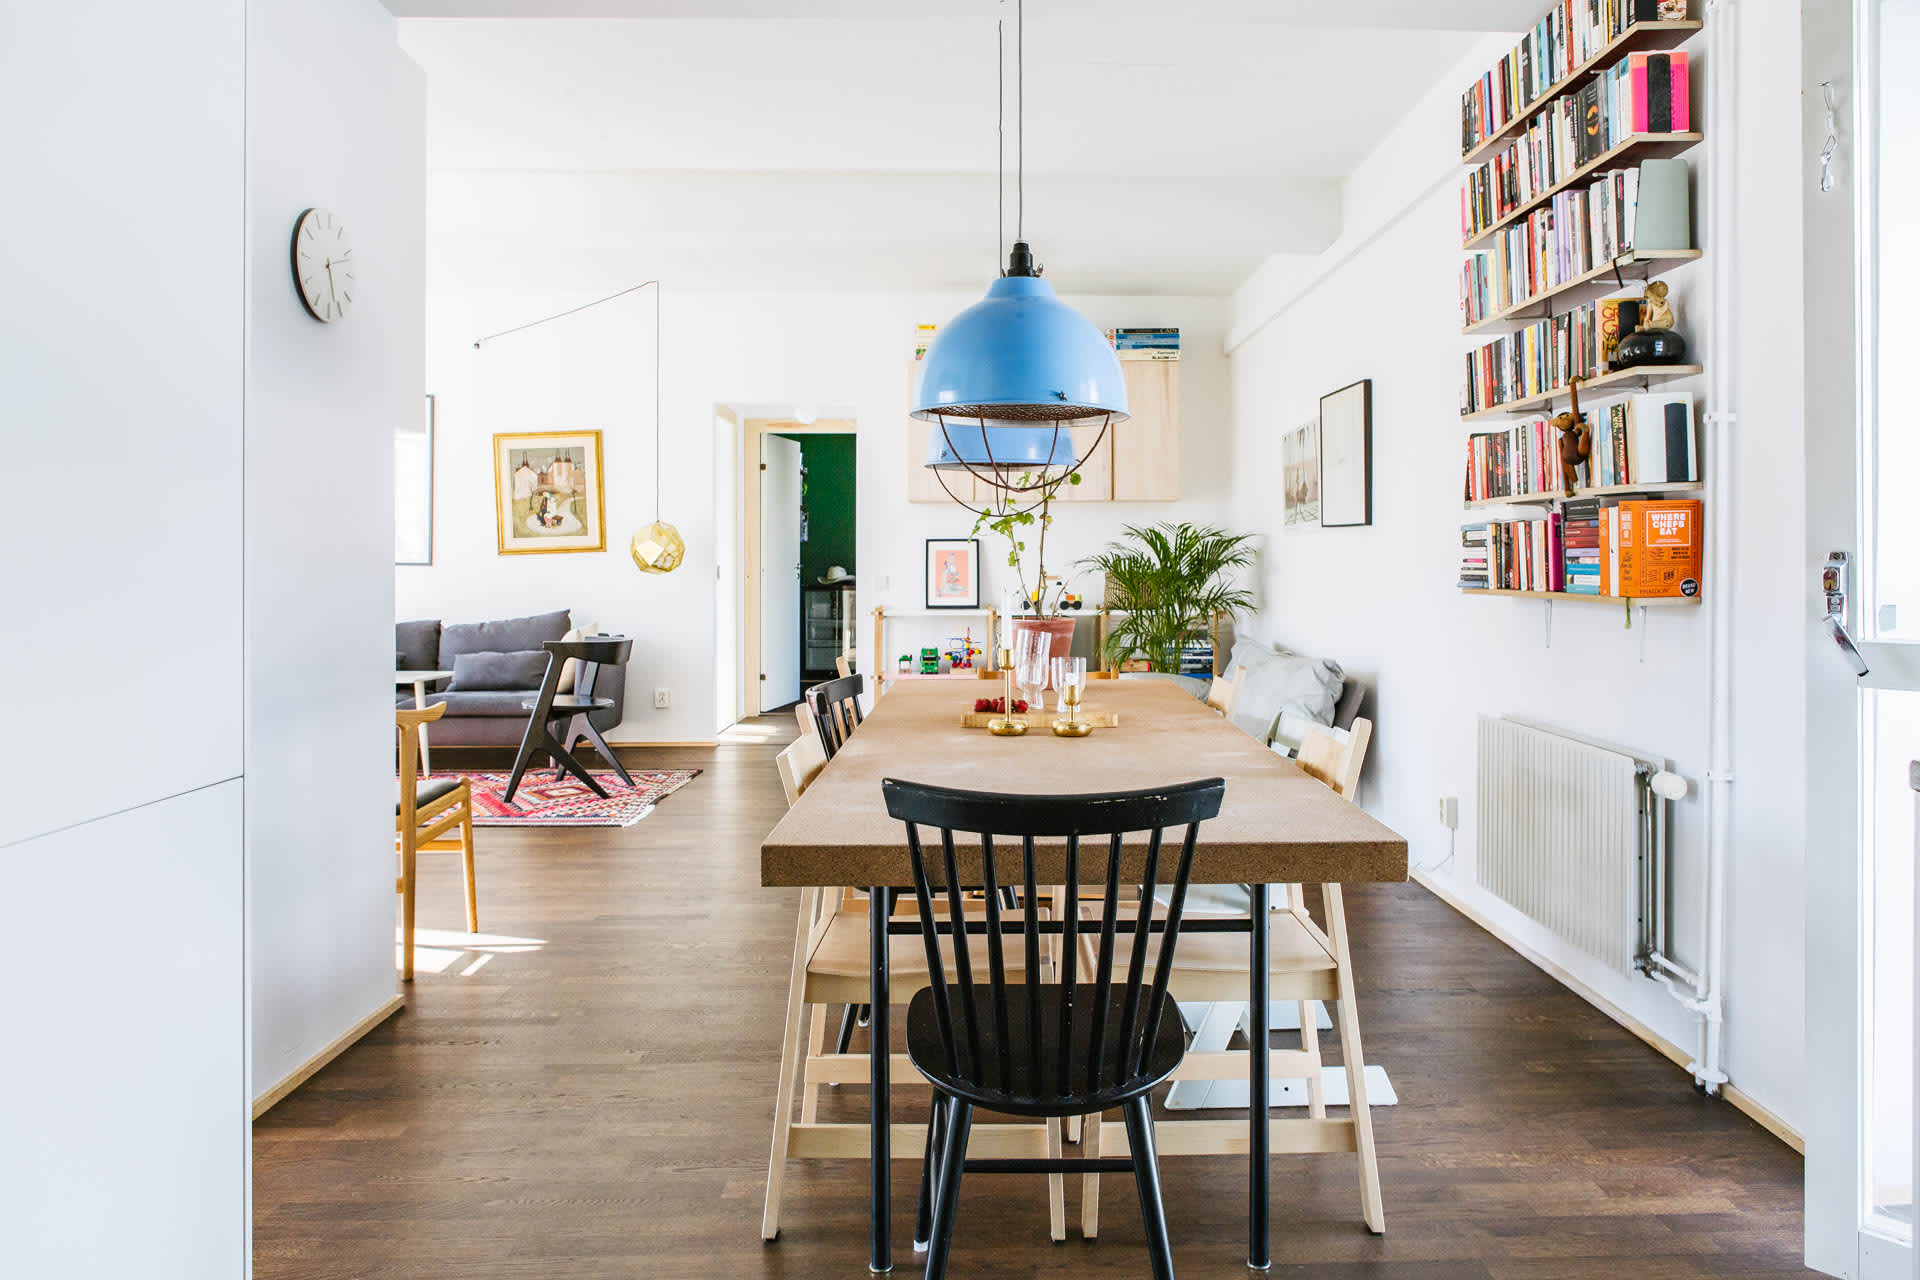 Scandinavian Home Tour: An Architect's Modern Space | Apartment Therapy